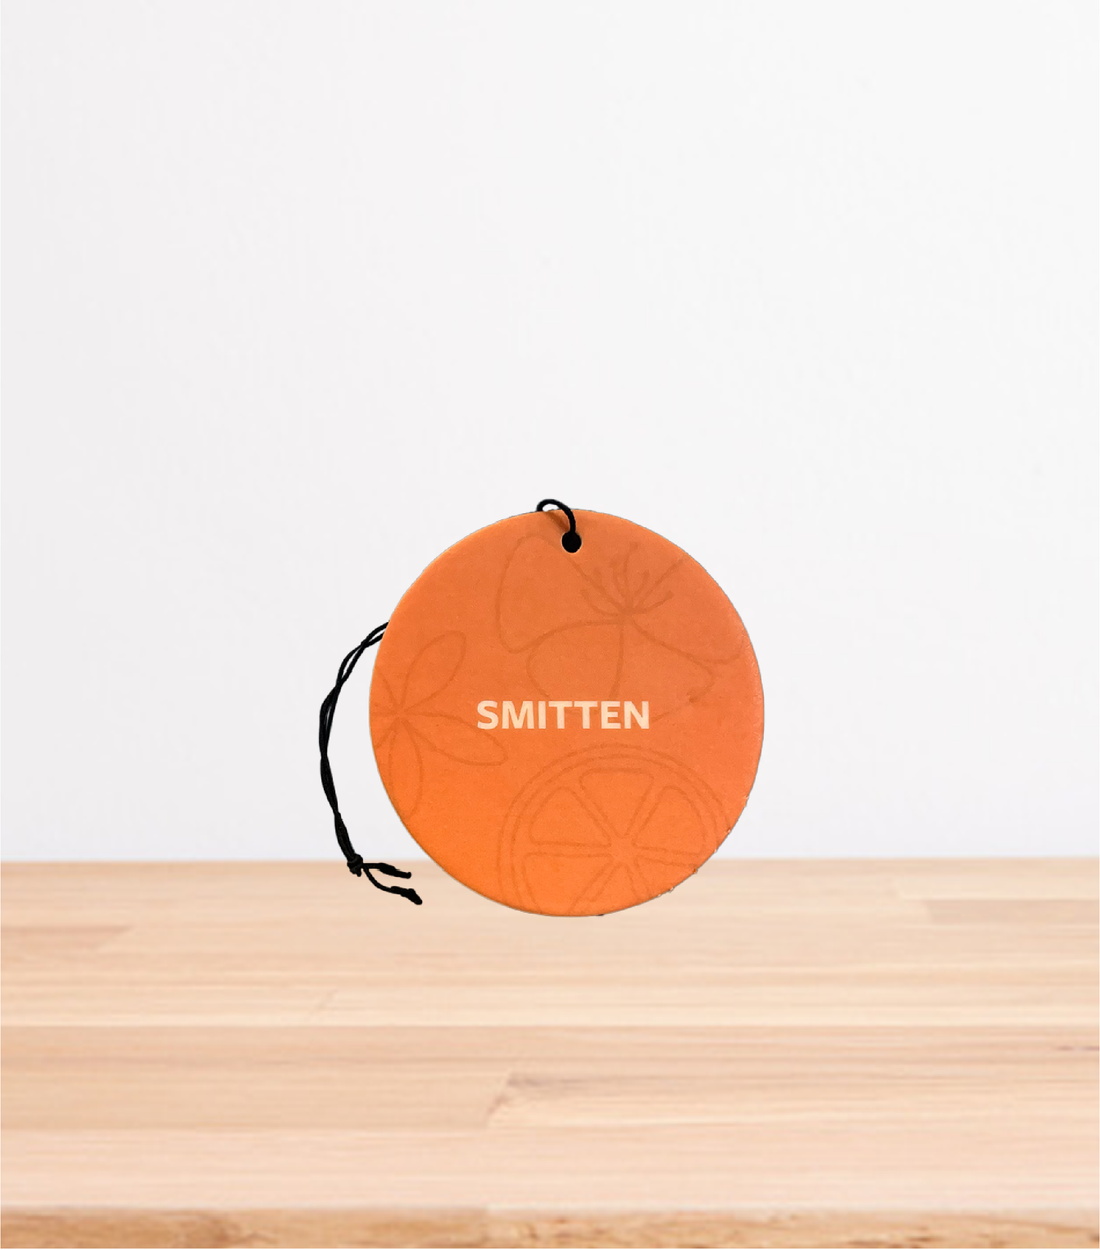 A Smitten Car Freshener On a wooden Table.